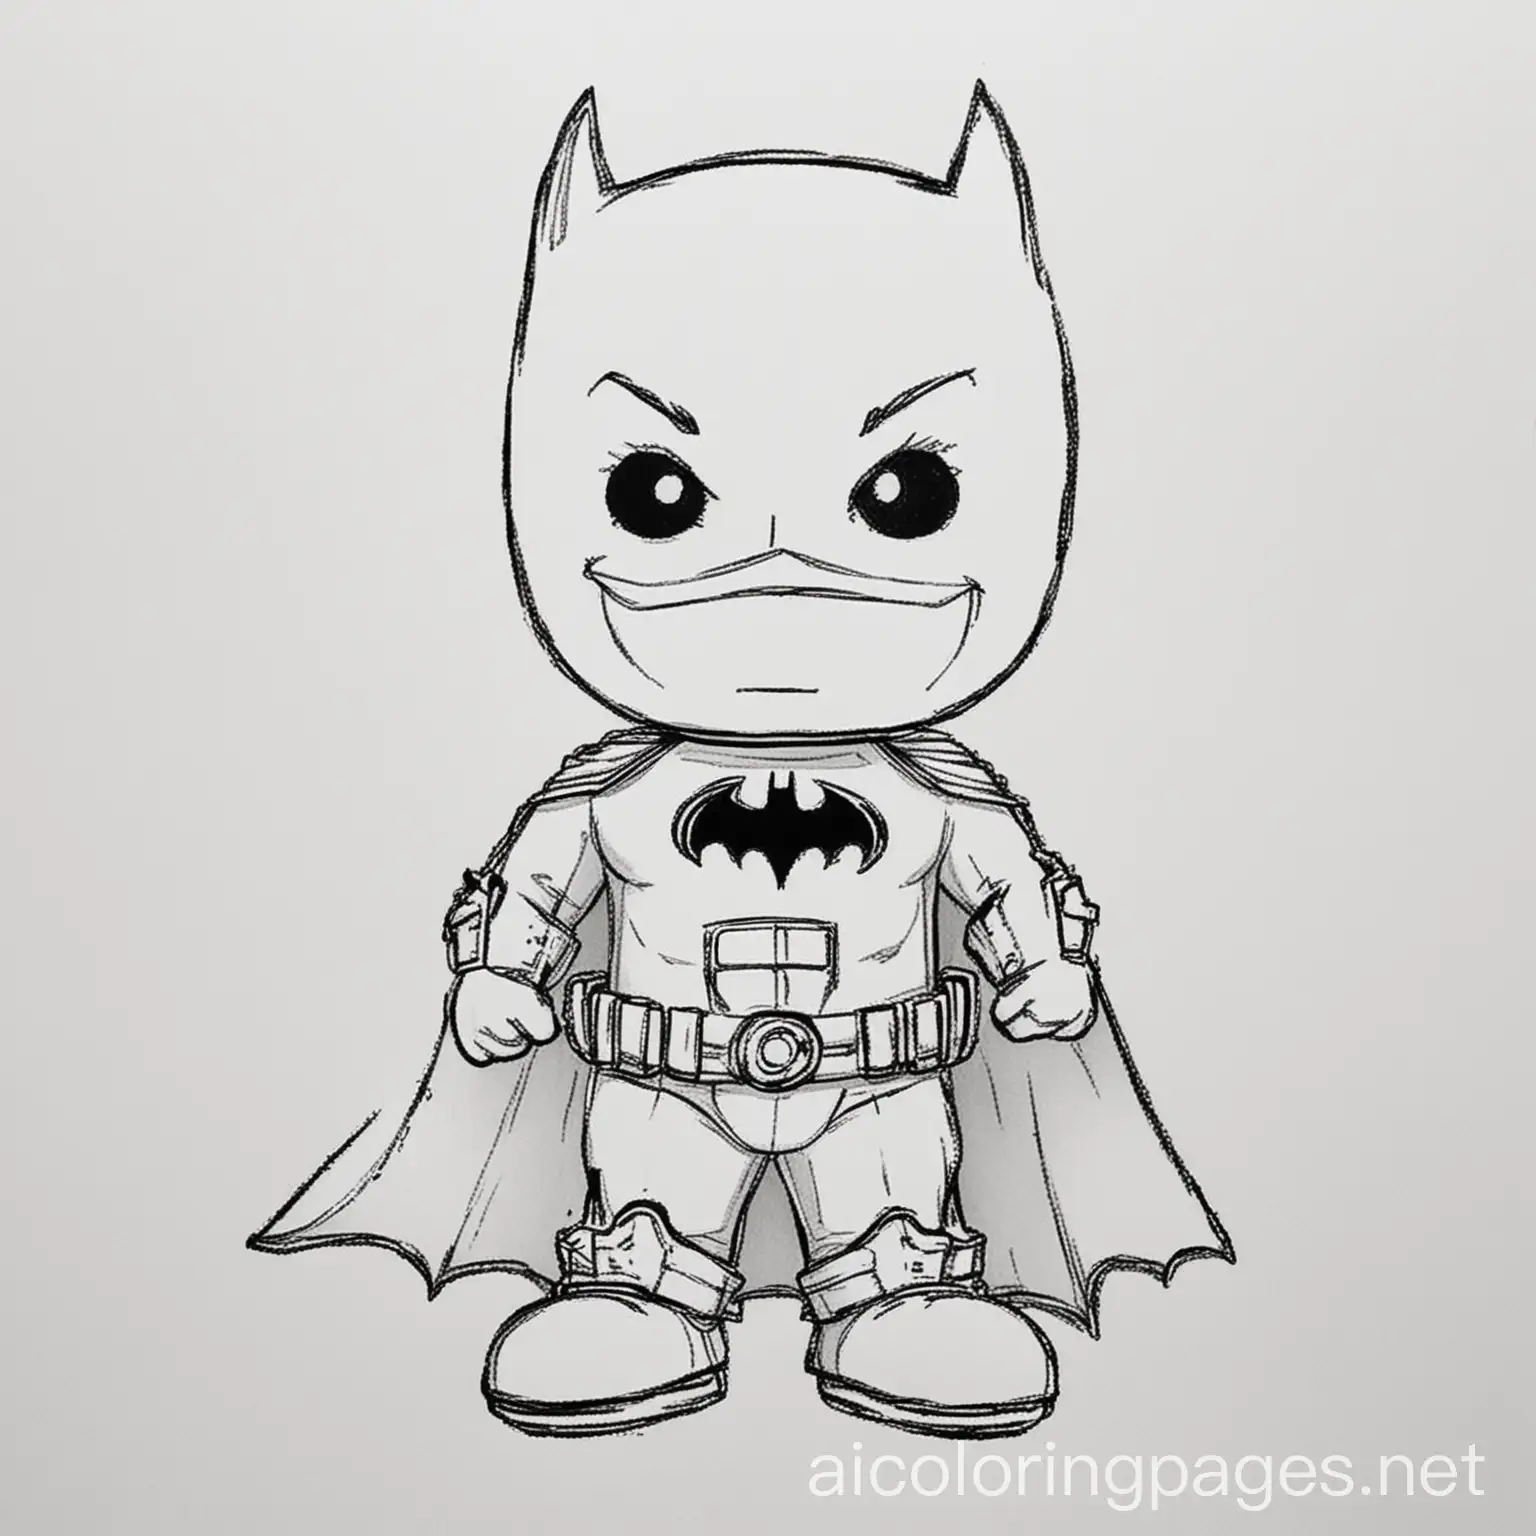 cute Batman, Coloring Page, black and white, line art, white background, Simplicity, Ample White Space. The background of the coloring page is plain white to make it easy for young children to color within the lines. The outlines of all the subjects are easy to distinguish, making it simple for kids to color without too much difficulty, Coloring Page, black and white, line art, white background, Simplicity, Ample White Space. The background of the coloring page is plain white to make it easy for young children to color within the lines. The outlines of all the subjects are easy to distinguish, making it simple for kids to color without too much difficulty